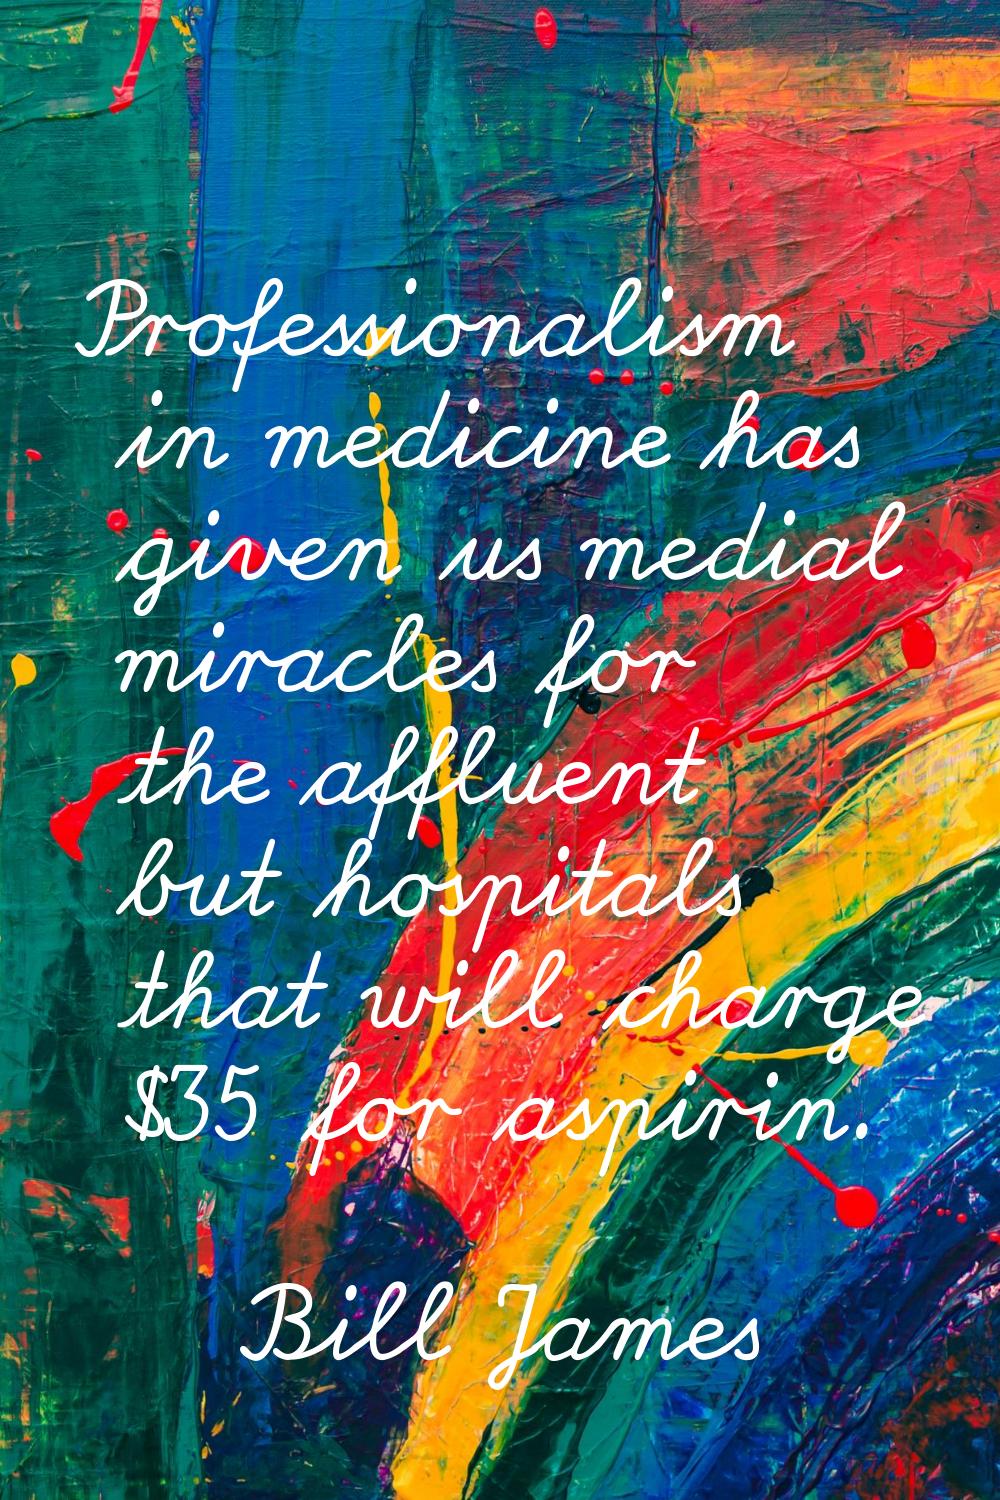 Professionalism in medicine has given us medial miracles for the affluent but hospitals that will c